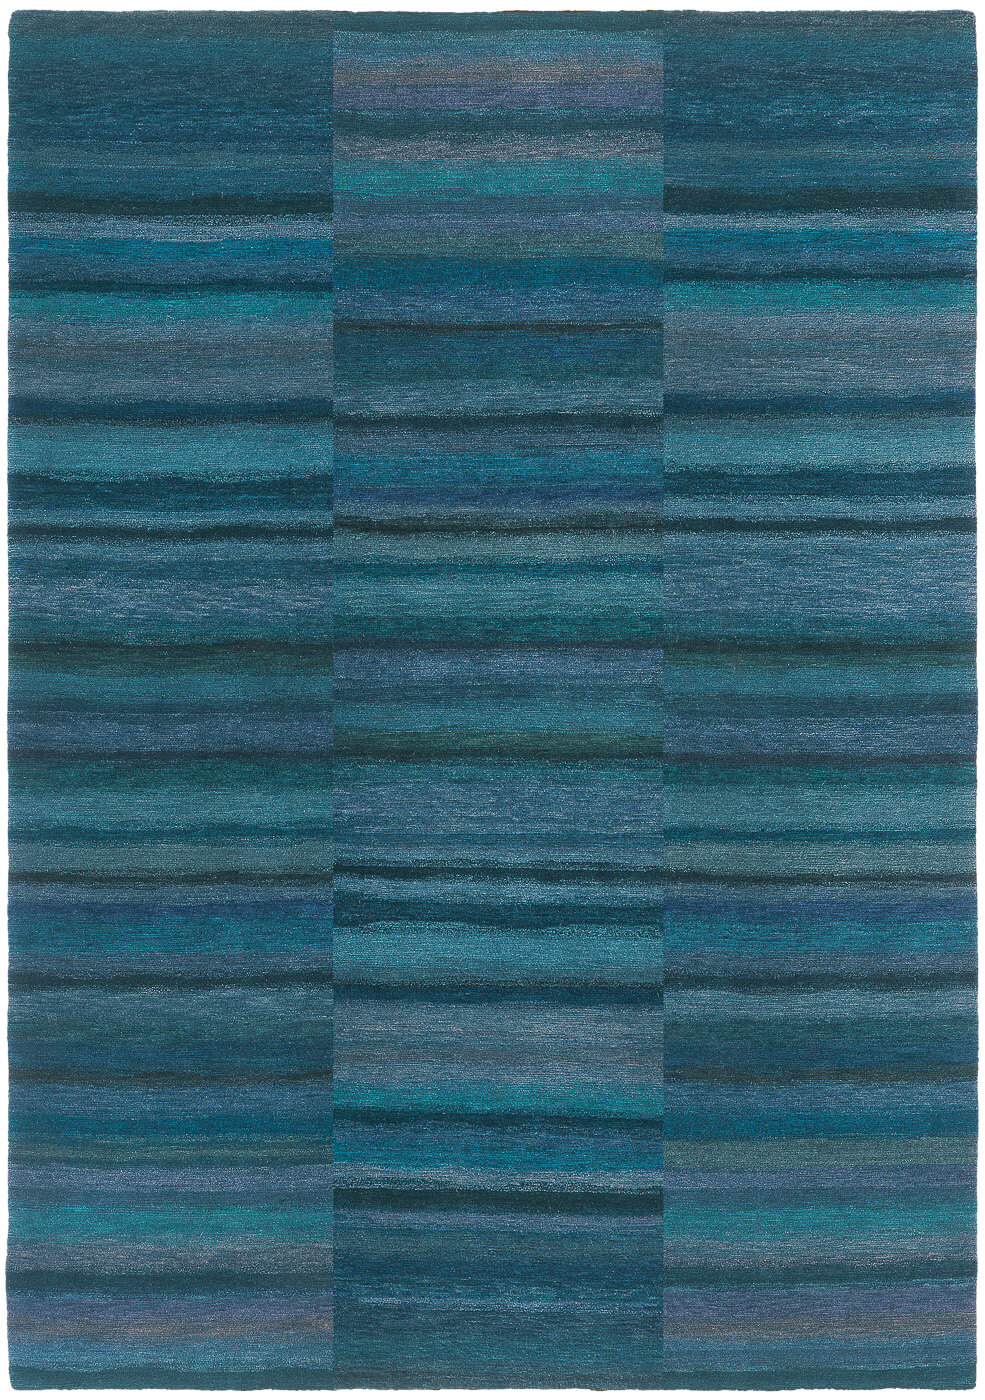 Blue Lines Hand-woven Luxury Rug ☞ Size: 200 x 300 cm